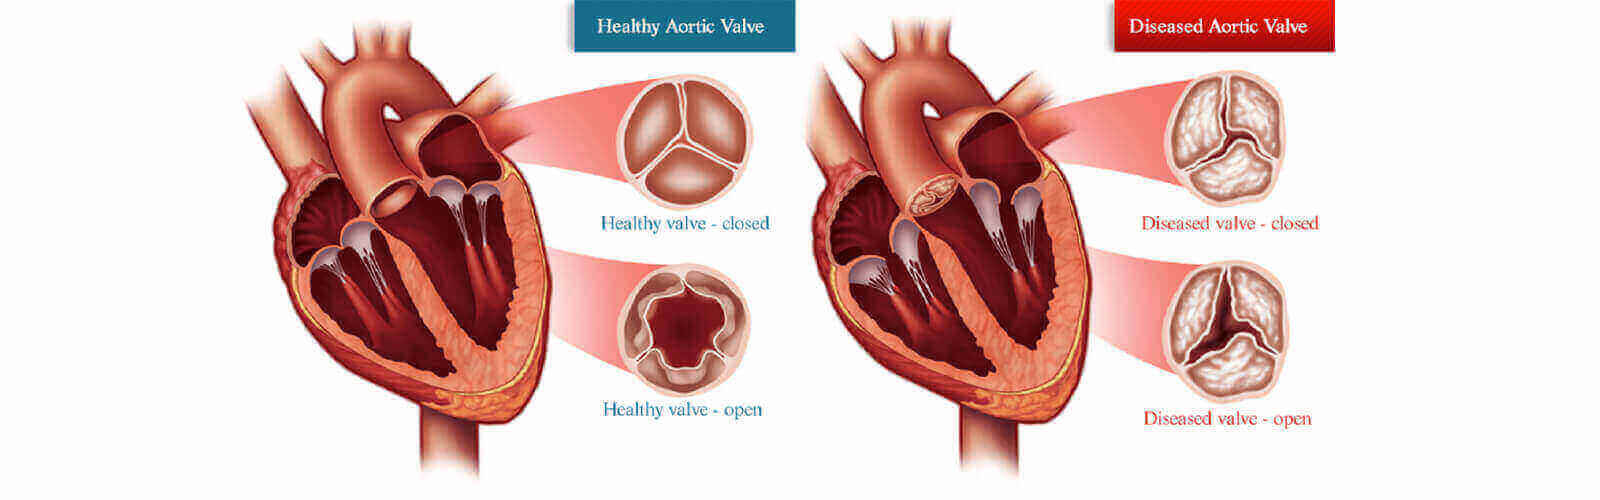 Heart Valve Replacement Surgery in Nigeria